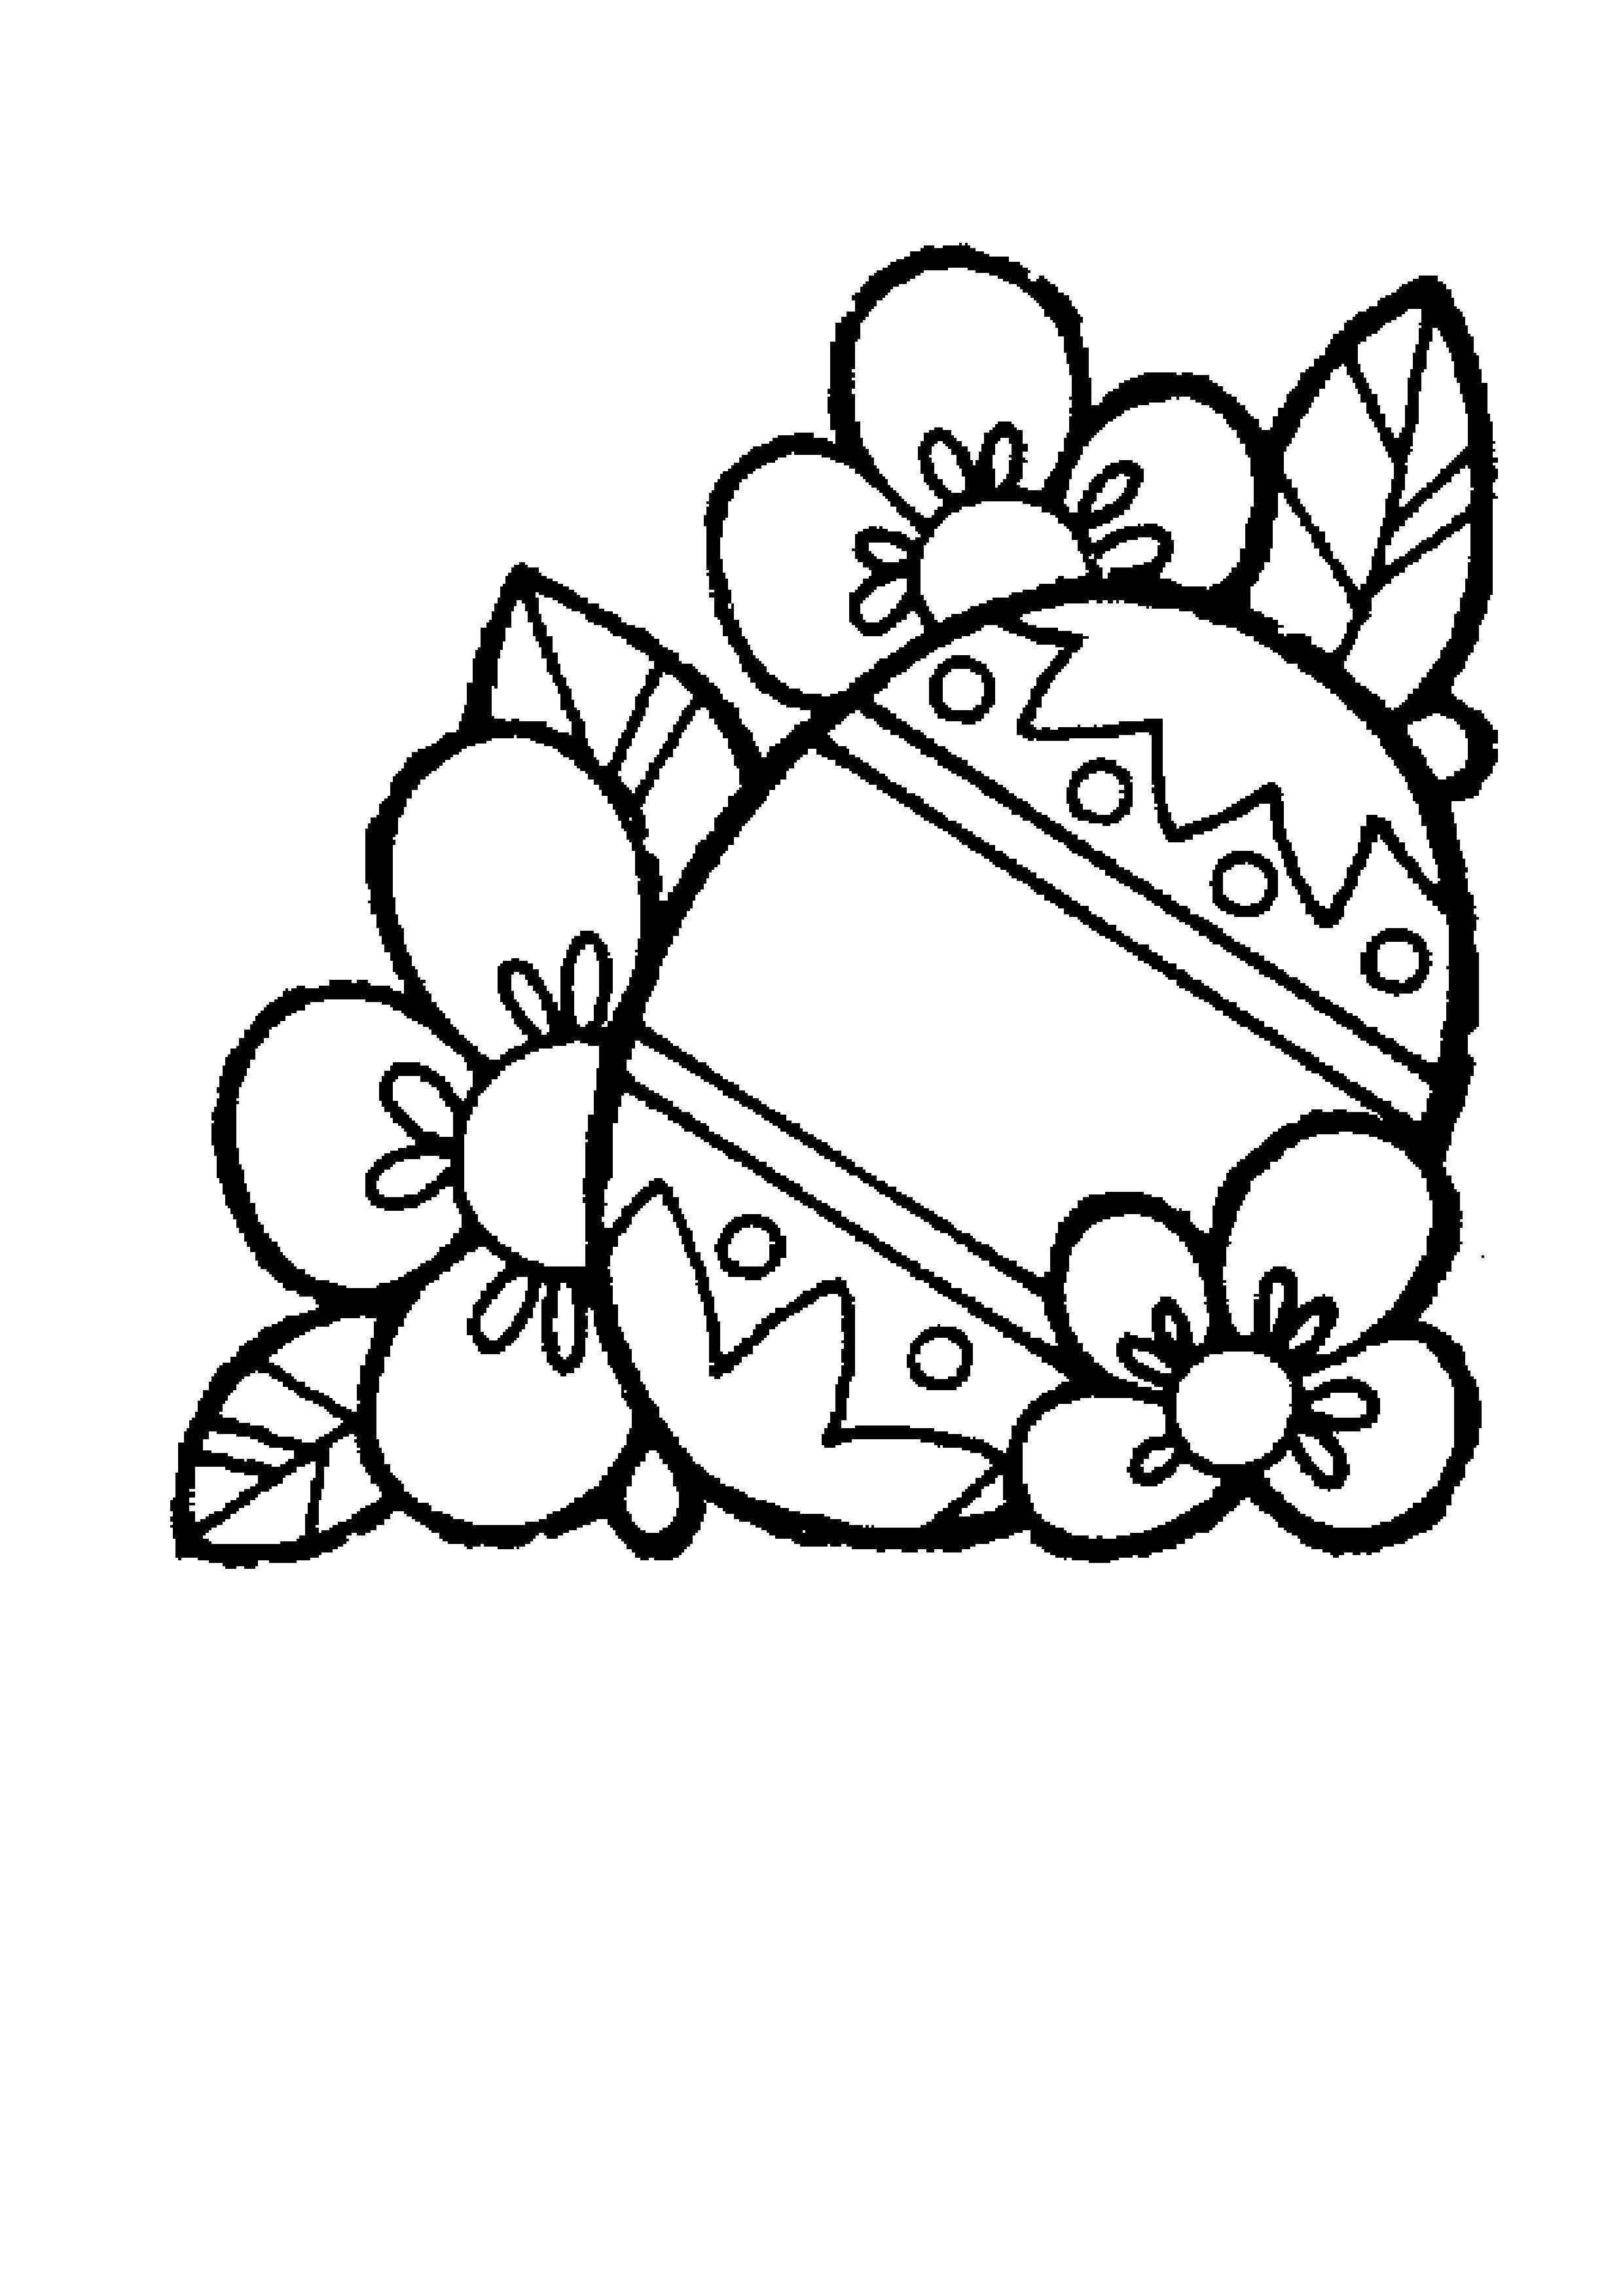 Coloring Easter egg. Category coloring Easter. Tags:  Easter, eggs, patterns.